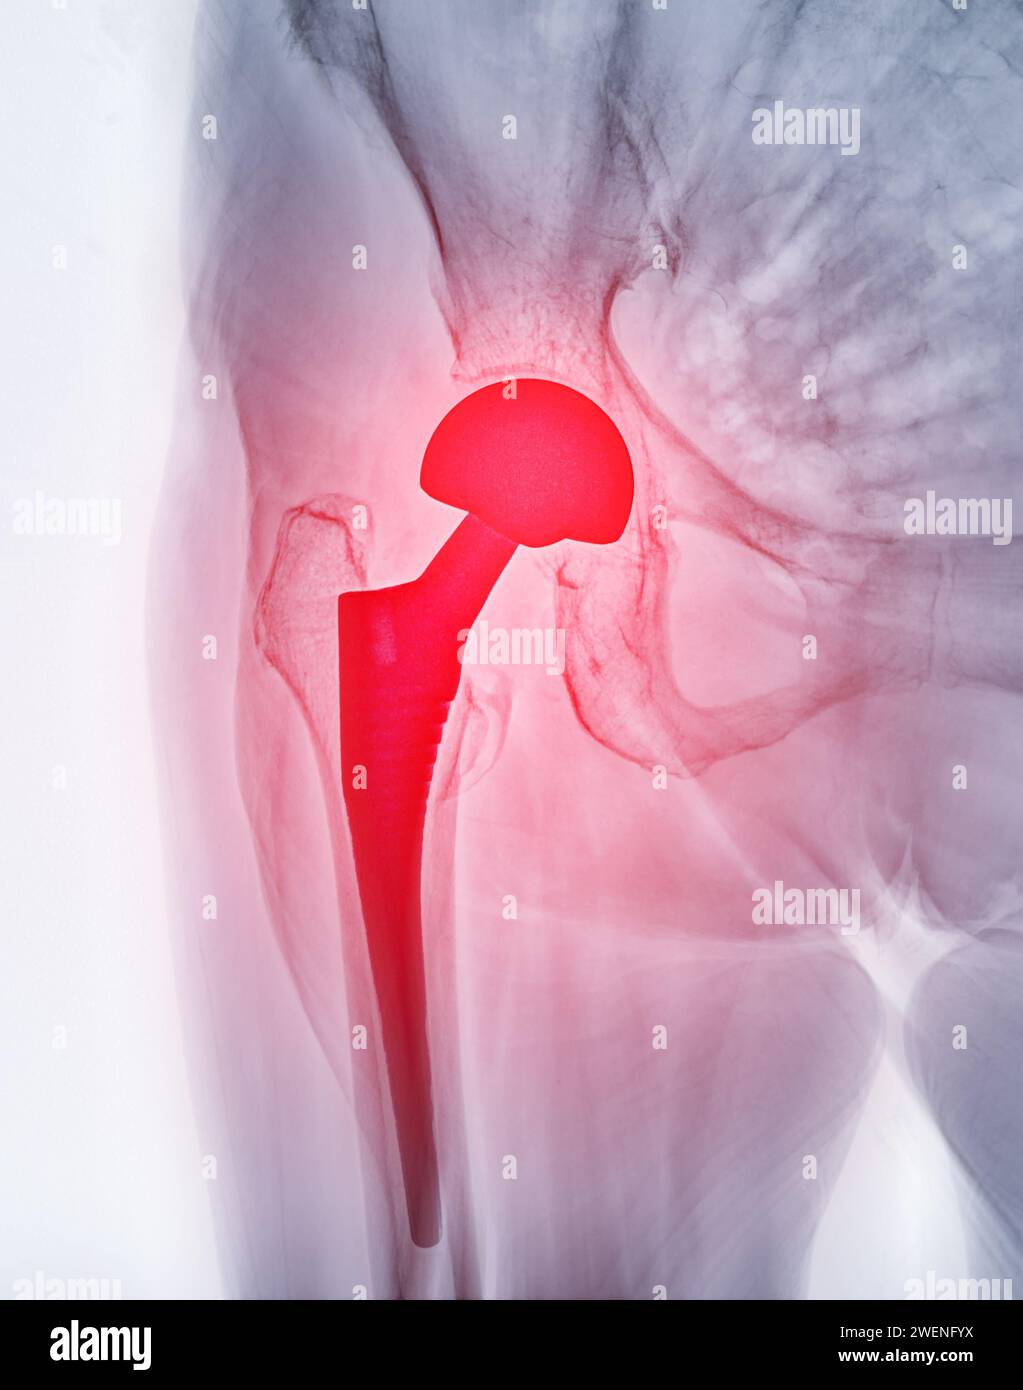 An X-ray reveals both hip joints with TOTAL HIP ARTHROPLASTY, showcasing the success of the surgical procedure and providing a visual testament to the Stock Photo